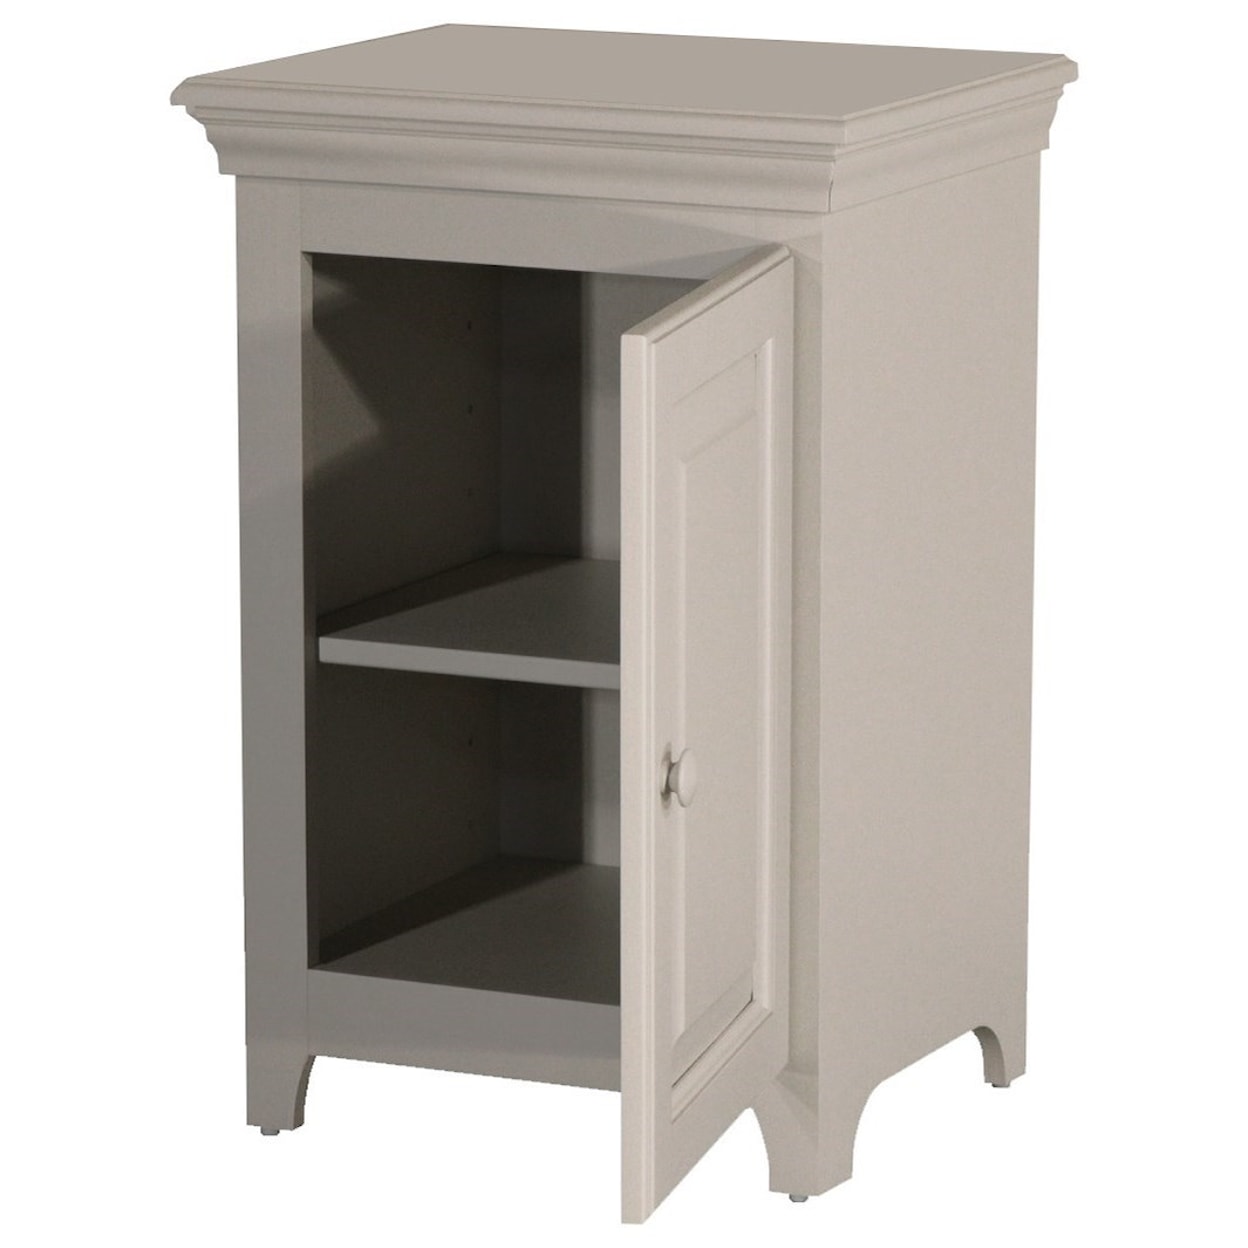 Archbold Furniture Pantries and Cabinets 1 Door Cabinet